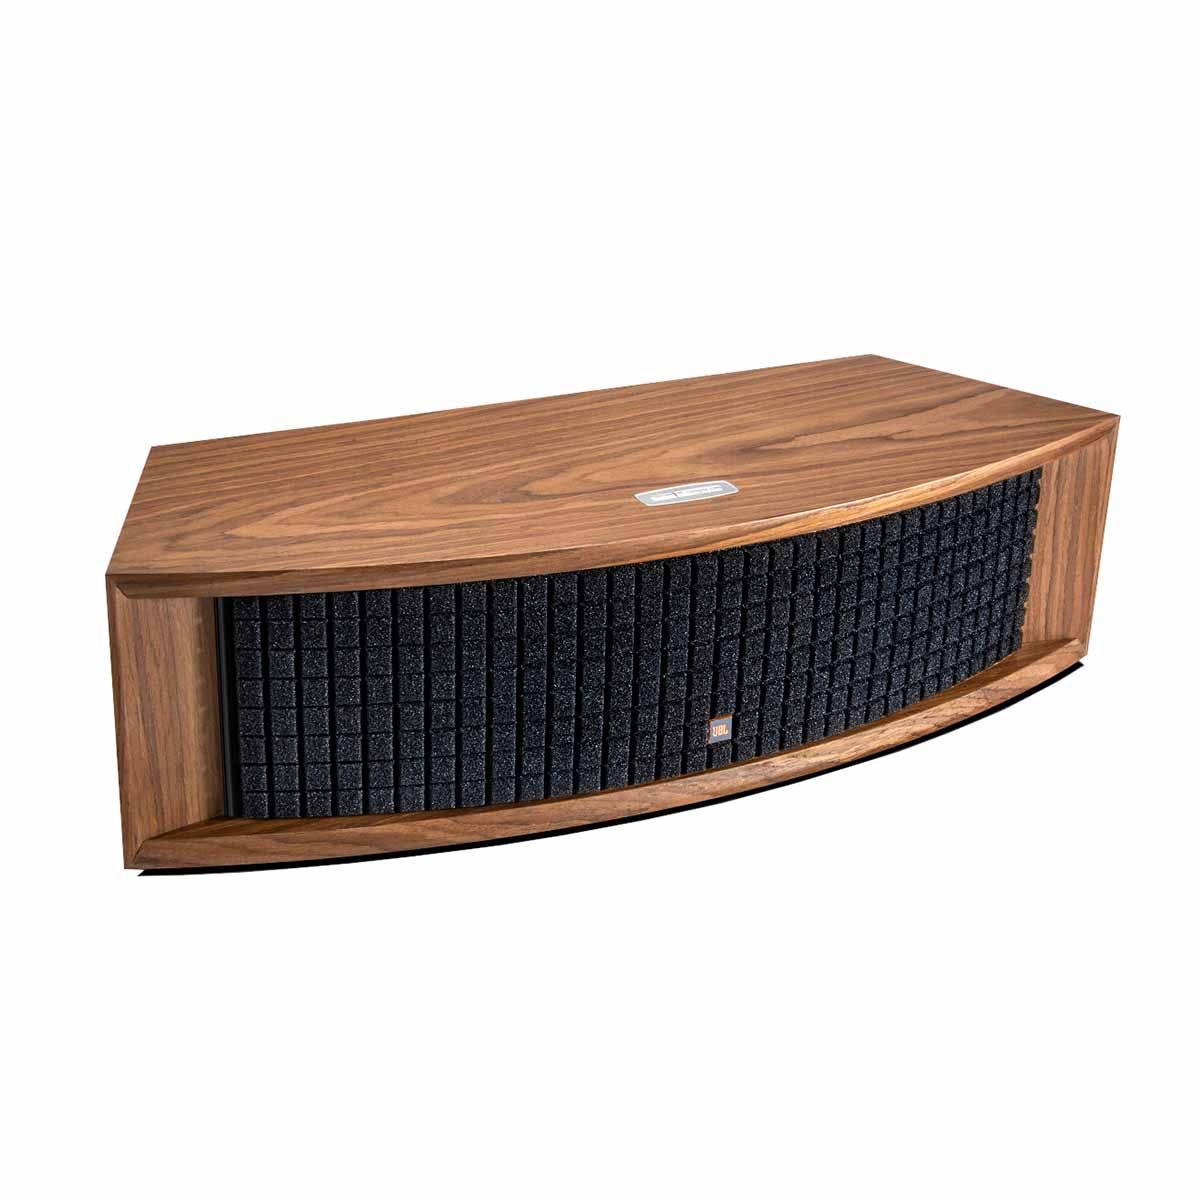 JBL L75ms Music System - Walnut angled front view with grille